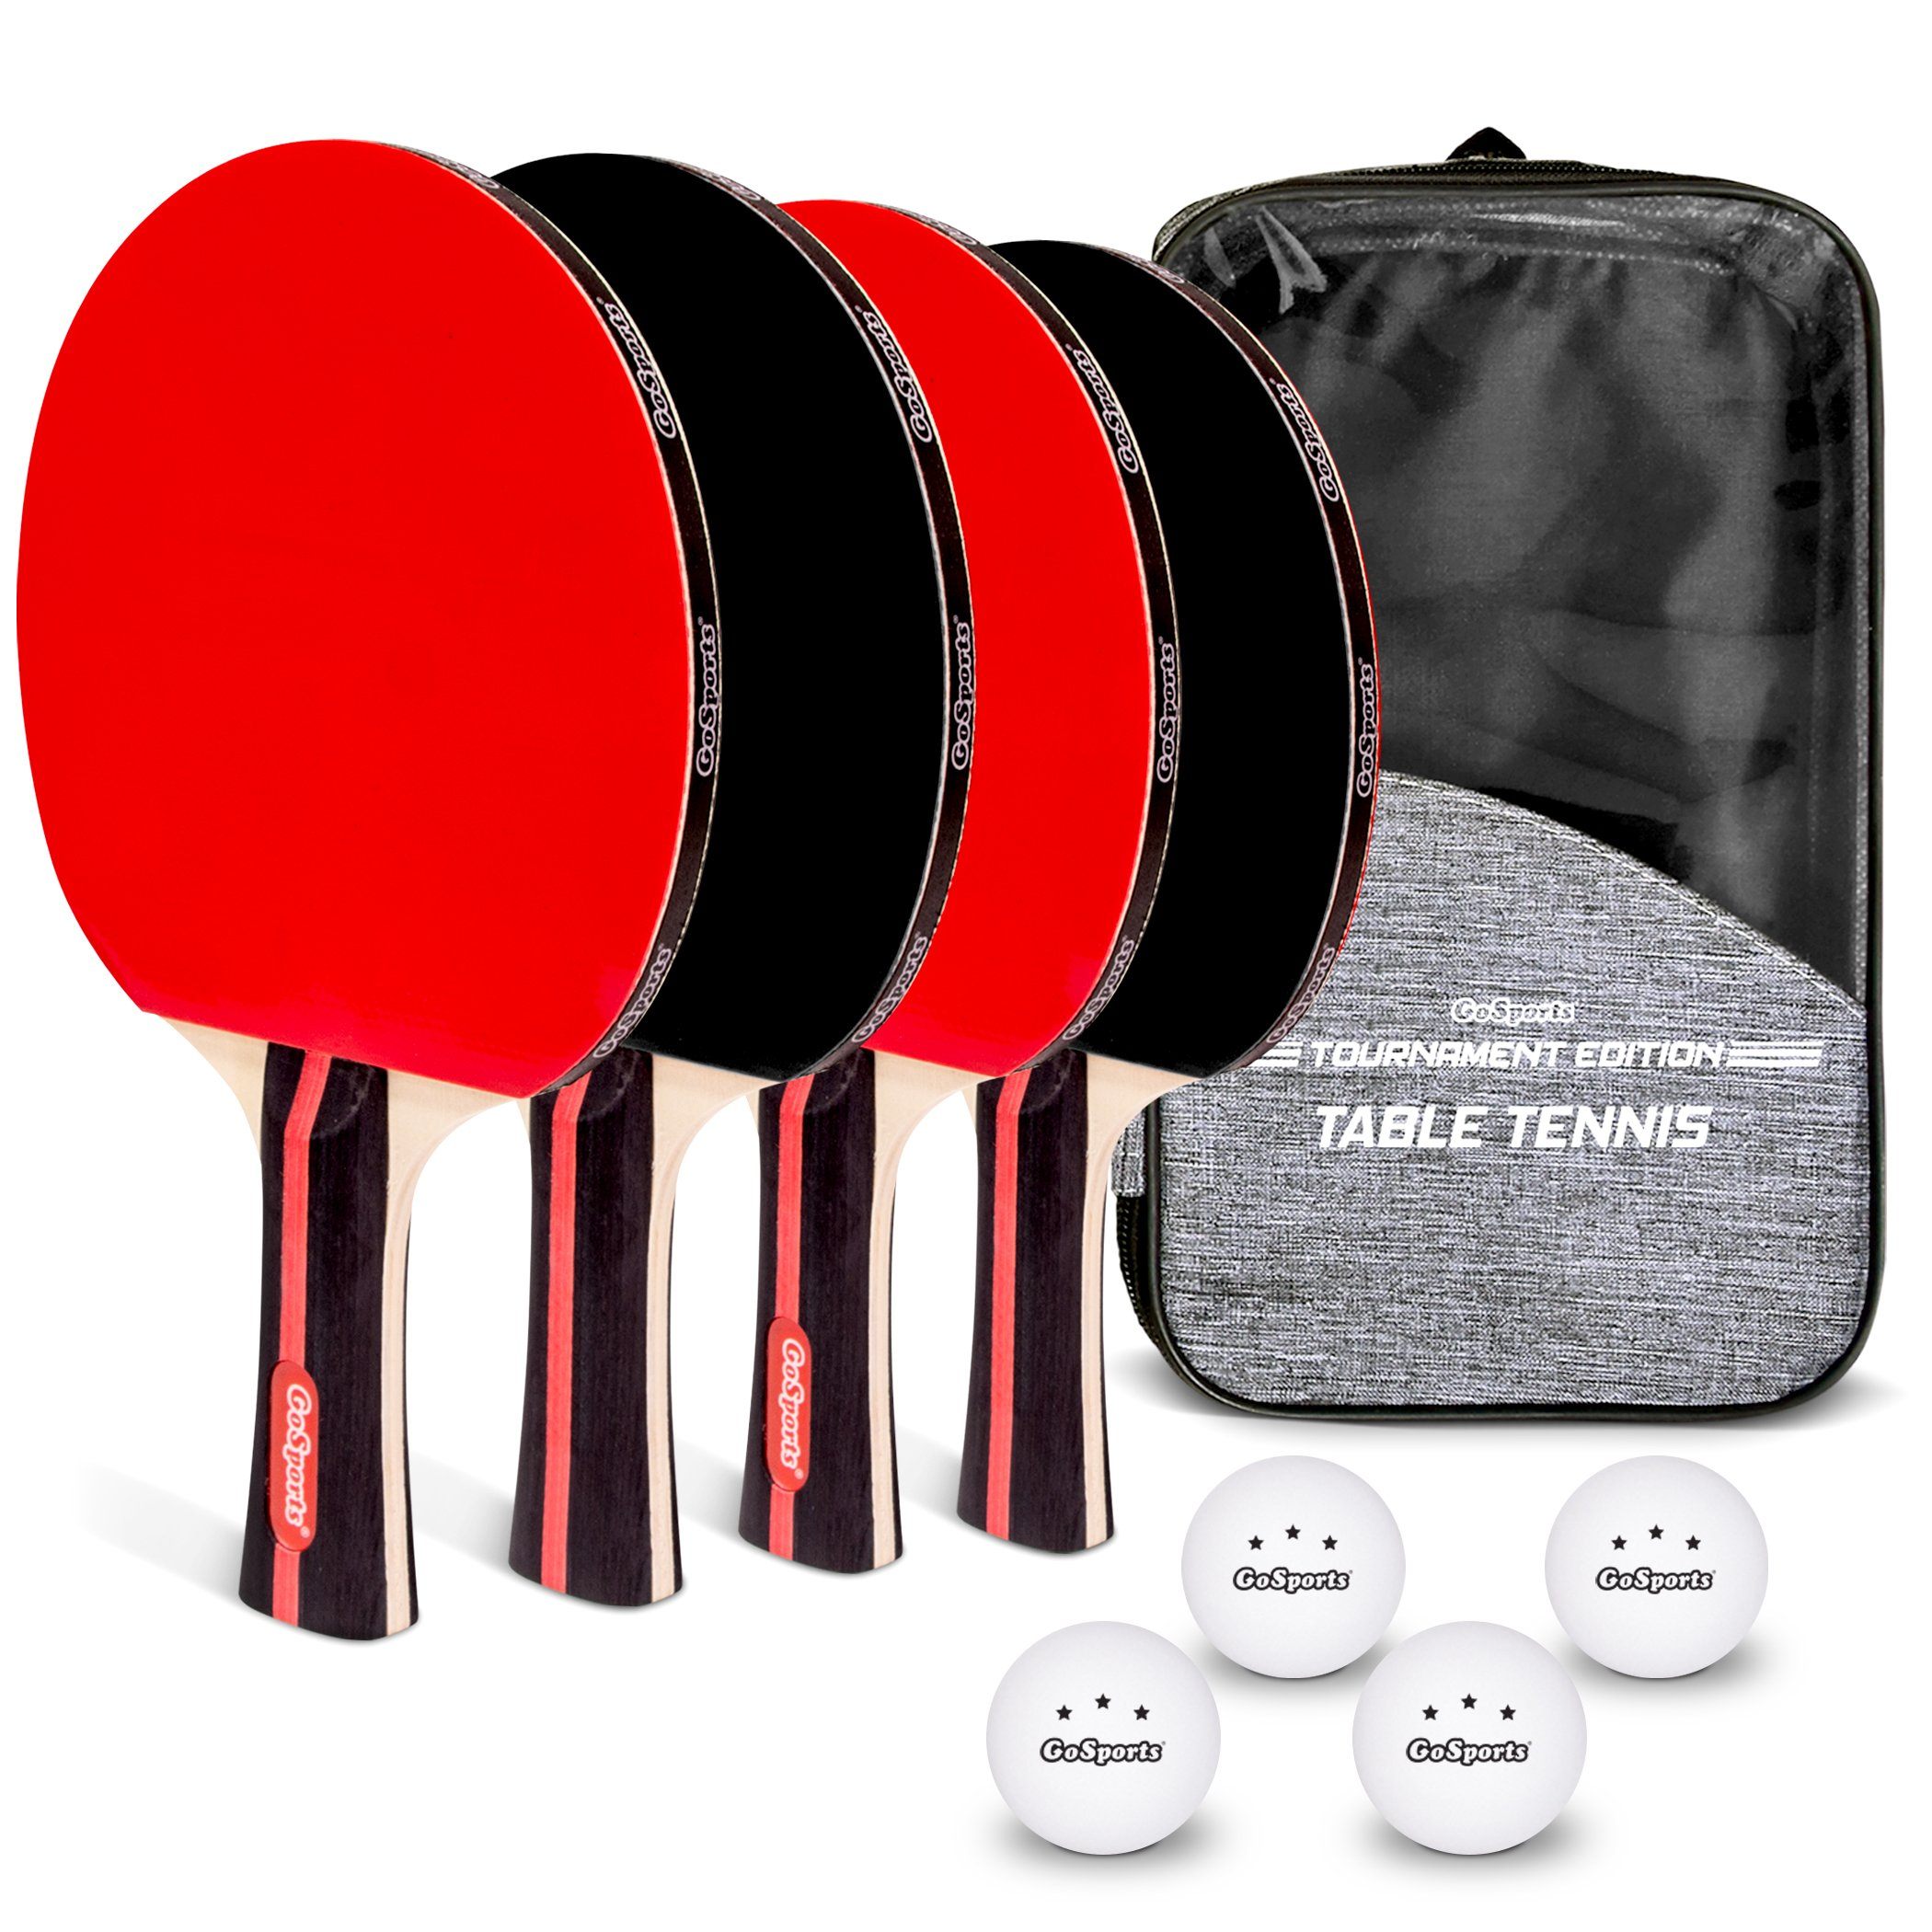 GoSports Mid Size 6 X 3 Foot Indoor Outdoor Table Tennis Ping Pong Game Set